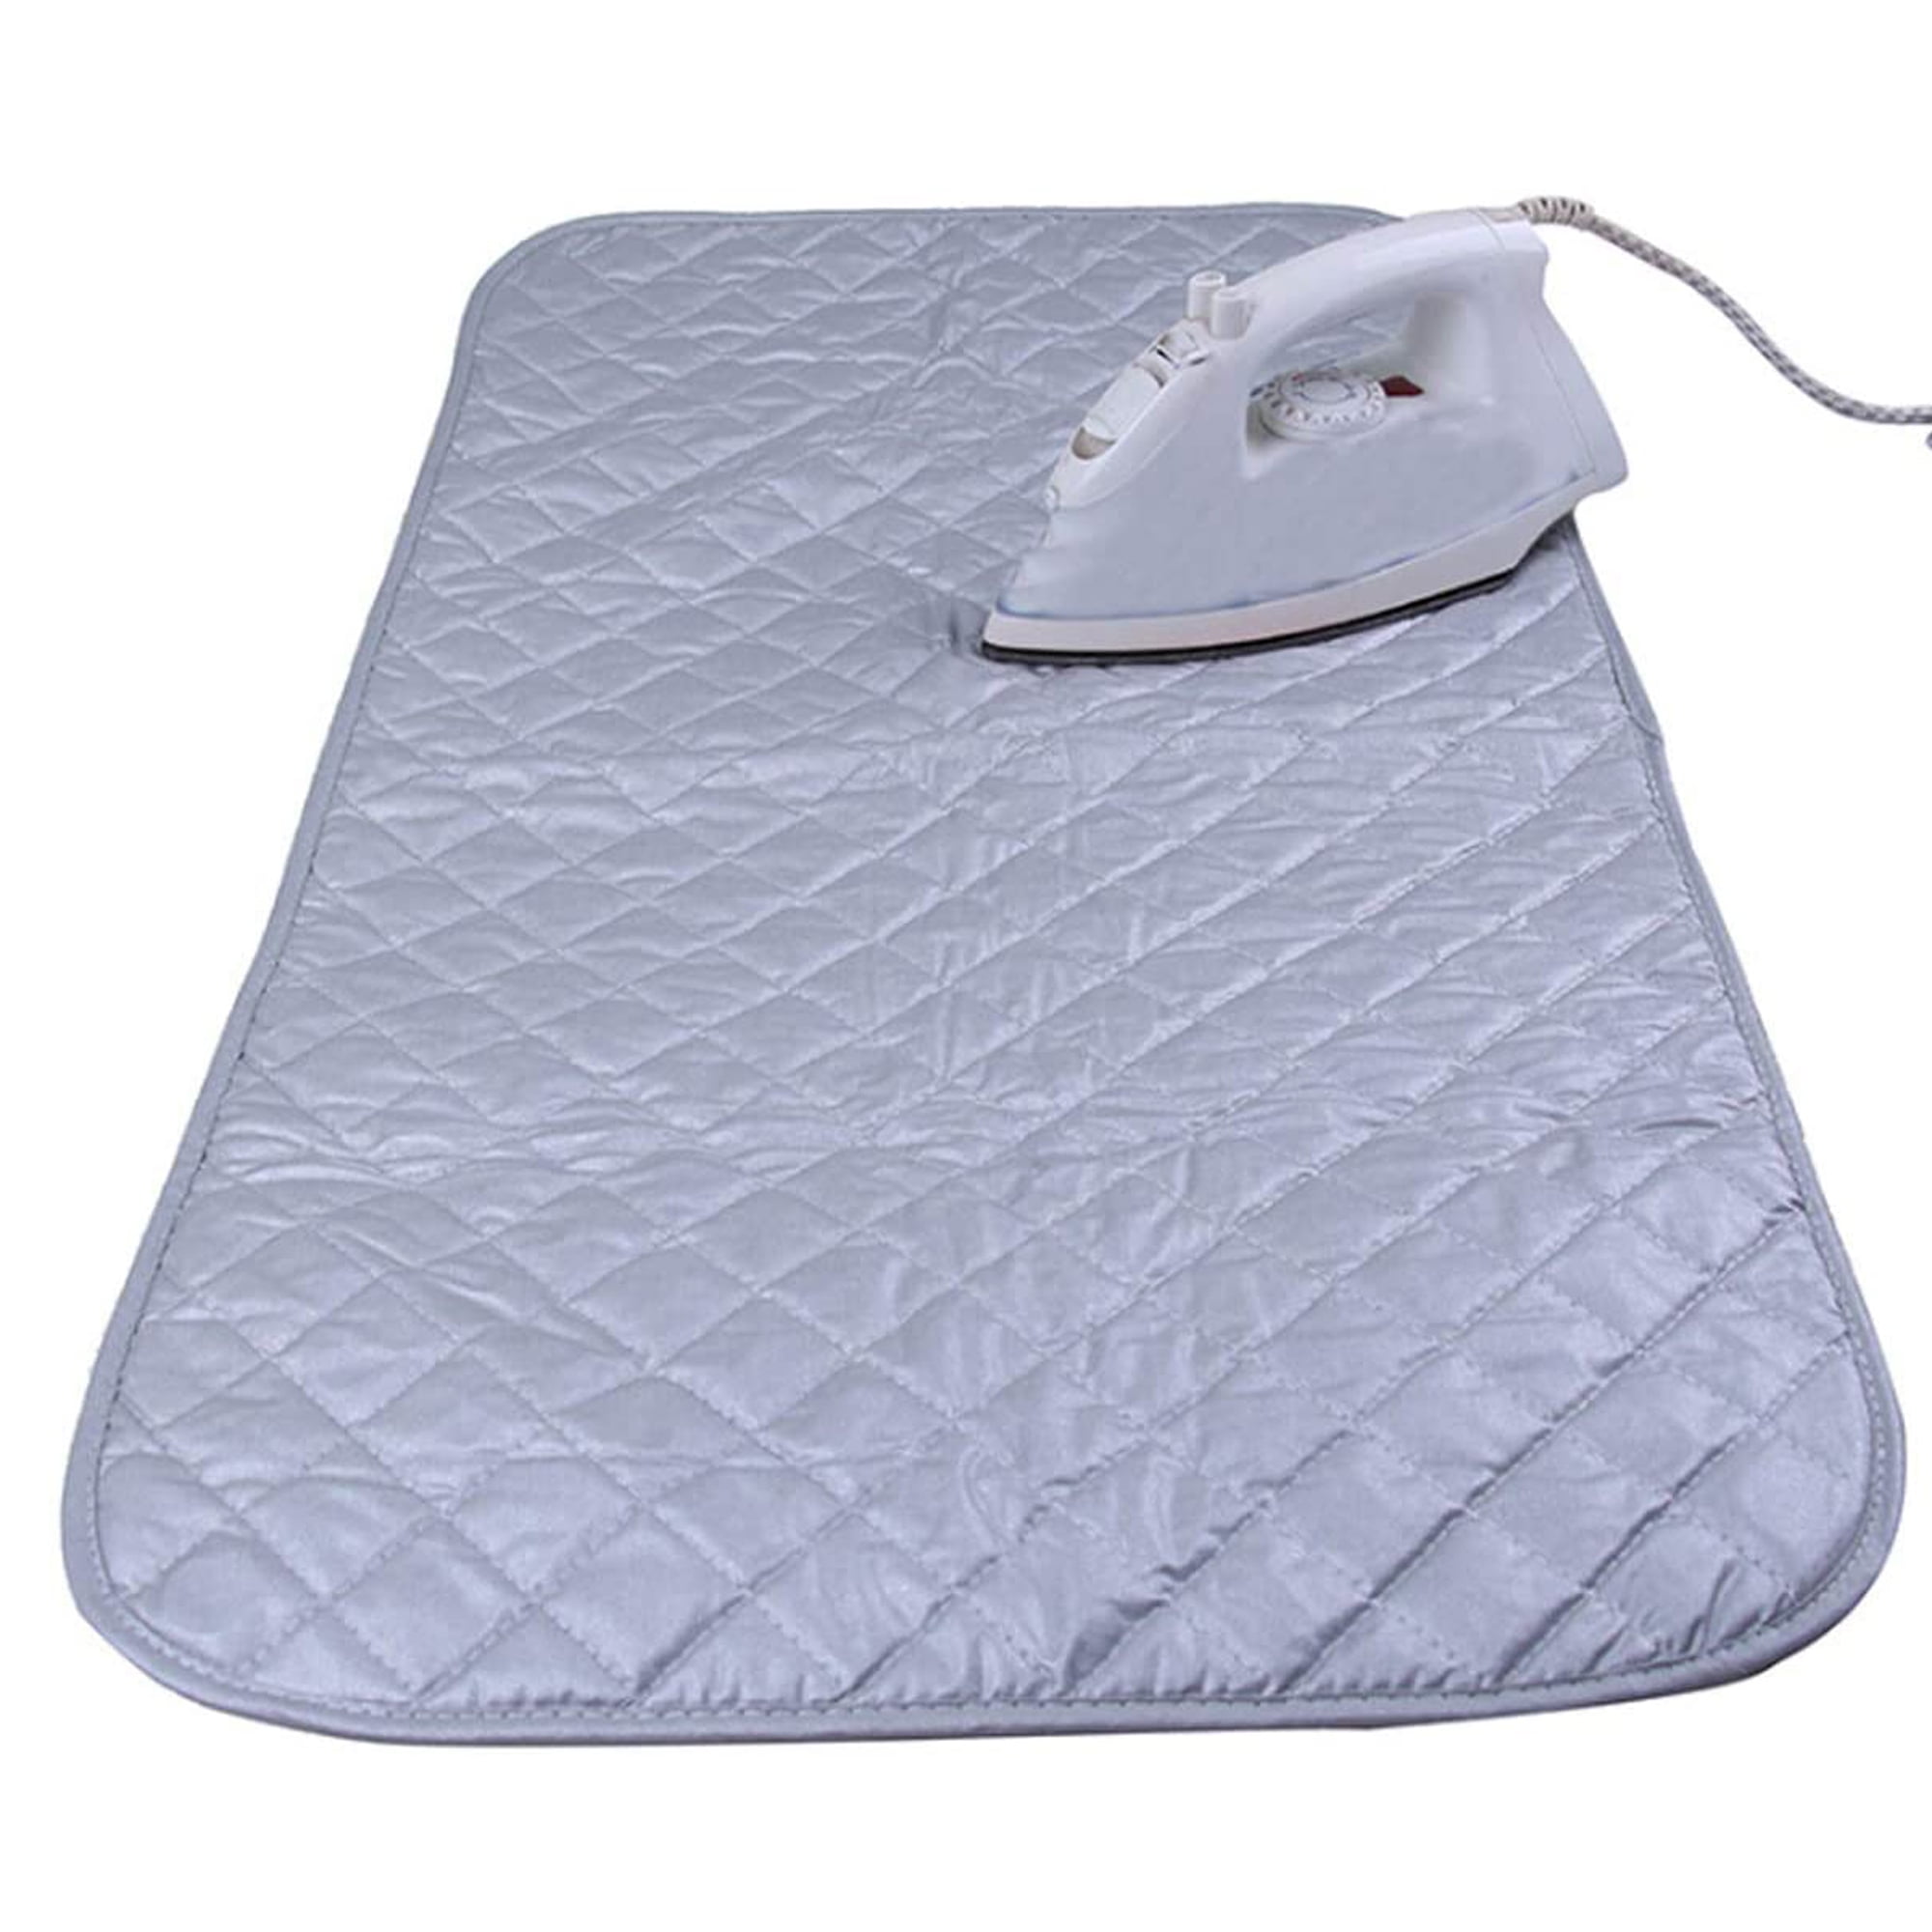 1PC Home Iron Dryer Clothing Ironing Pad Board Mat Travel Magnetic Resistant 